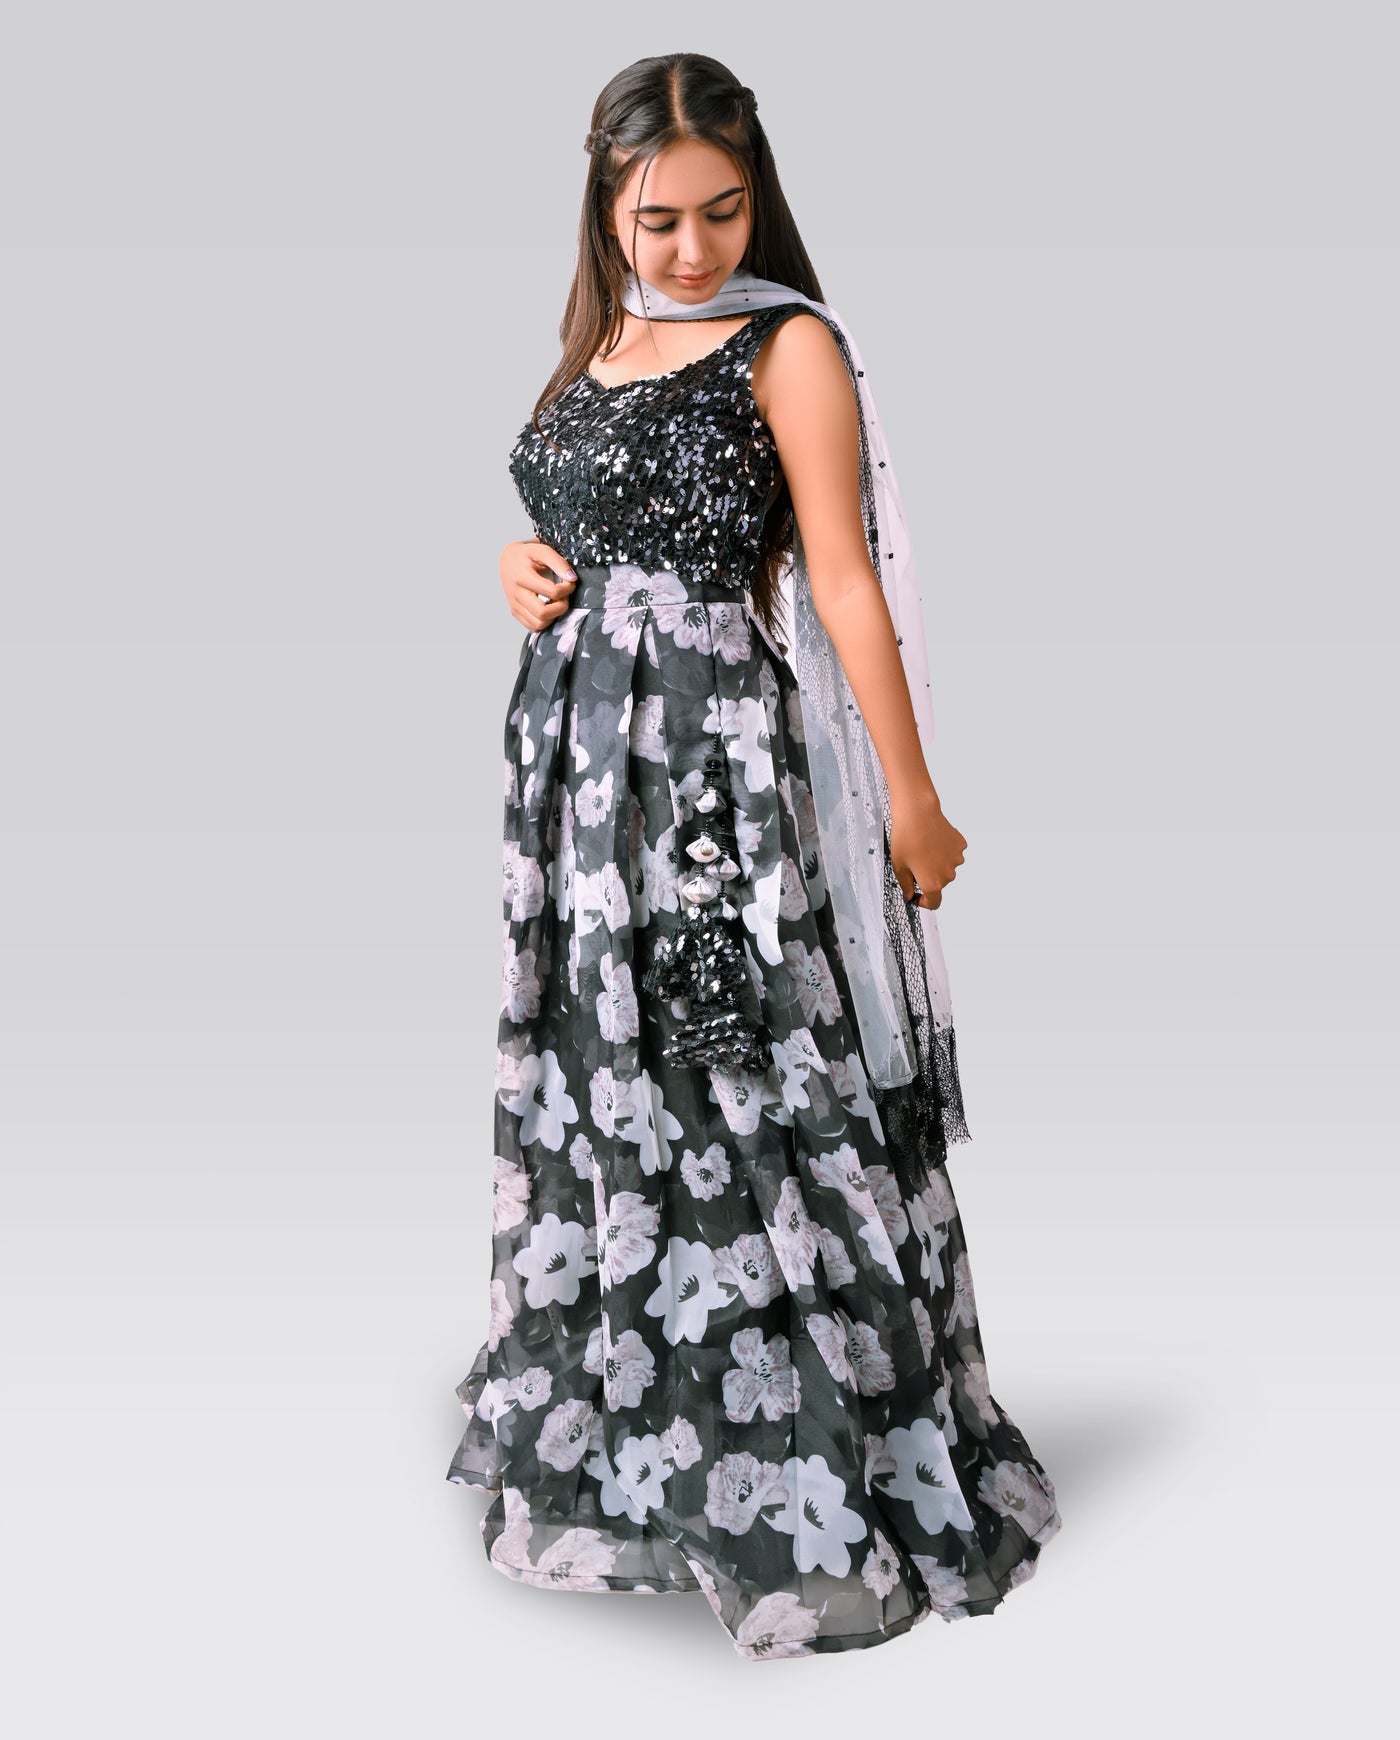 Midnight Bloom Lehenga - Indian Clothing in Denver, CO, Aurora, CO, Boulder, CO, Fort Collins, CO, Colorado Springs, CO, Parker, CO, Highlands Ranch, CO, Cherry Creek, CO, Centennial, CO, and Longmont, CO. Nationwide shipping USA - India Fashion X